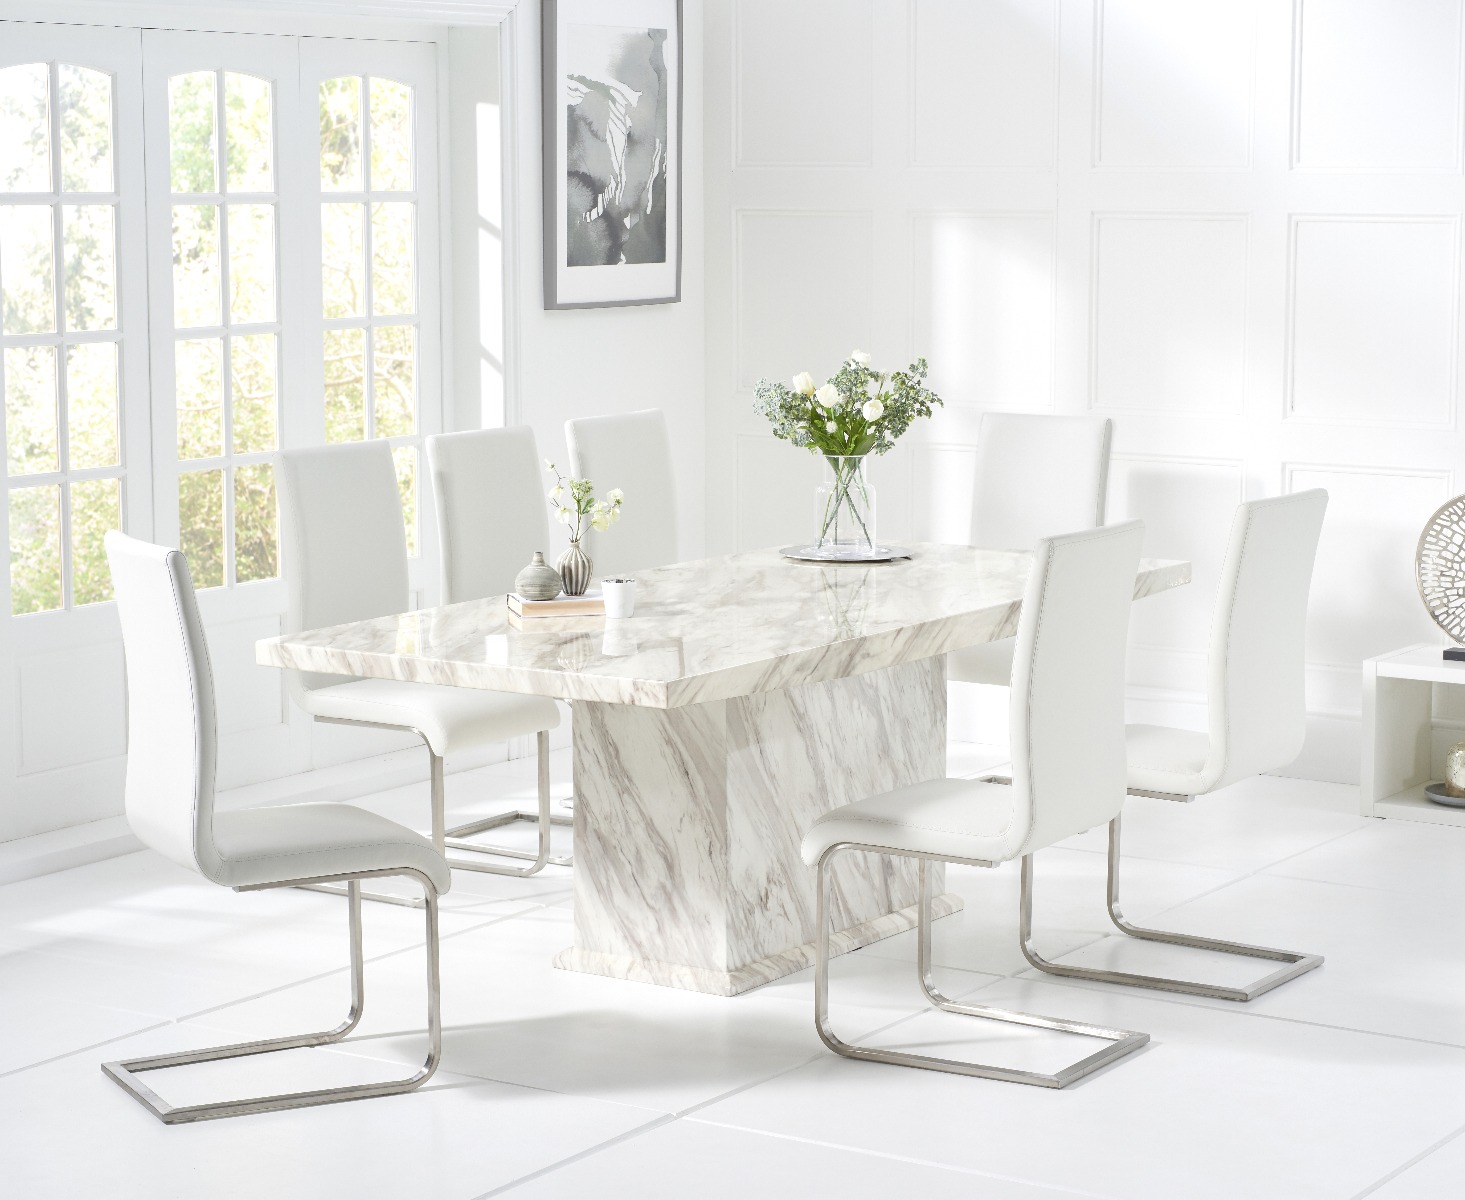 Calacatta 220cm Marbleeffect Dining Table With 10 Grey Malaga Chairs